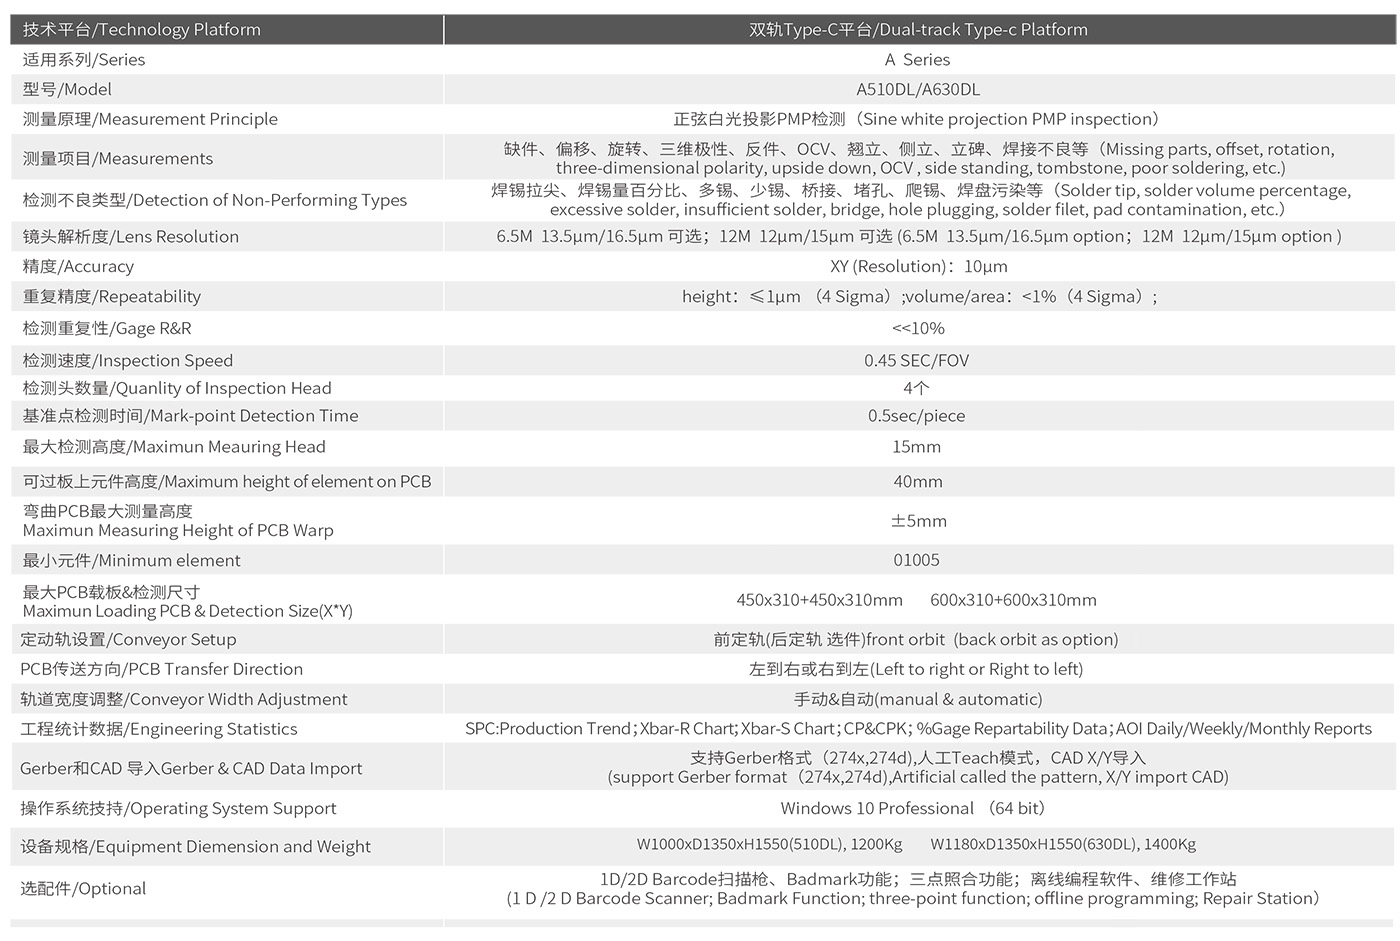 A-510DL Technical Specifications